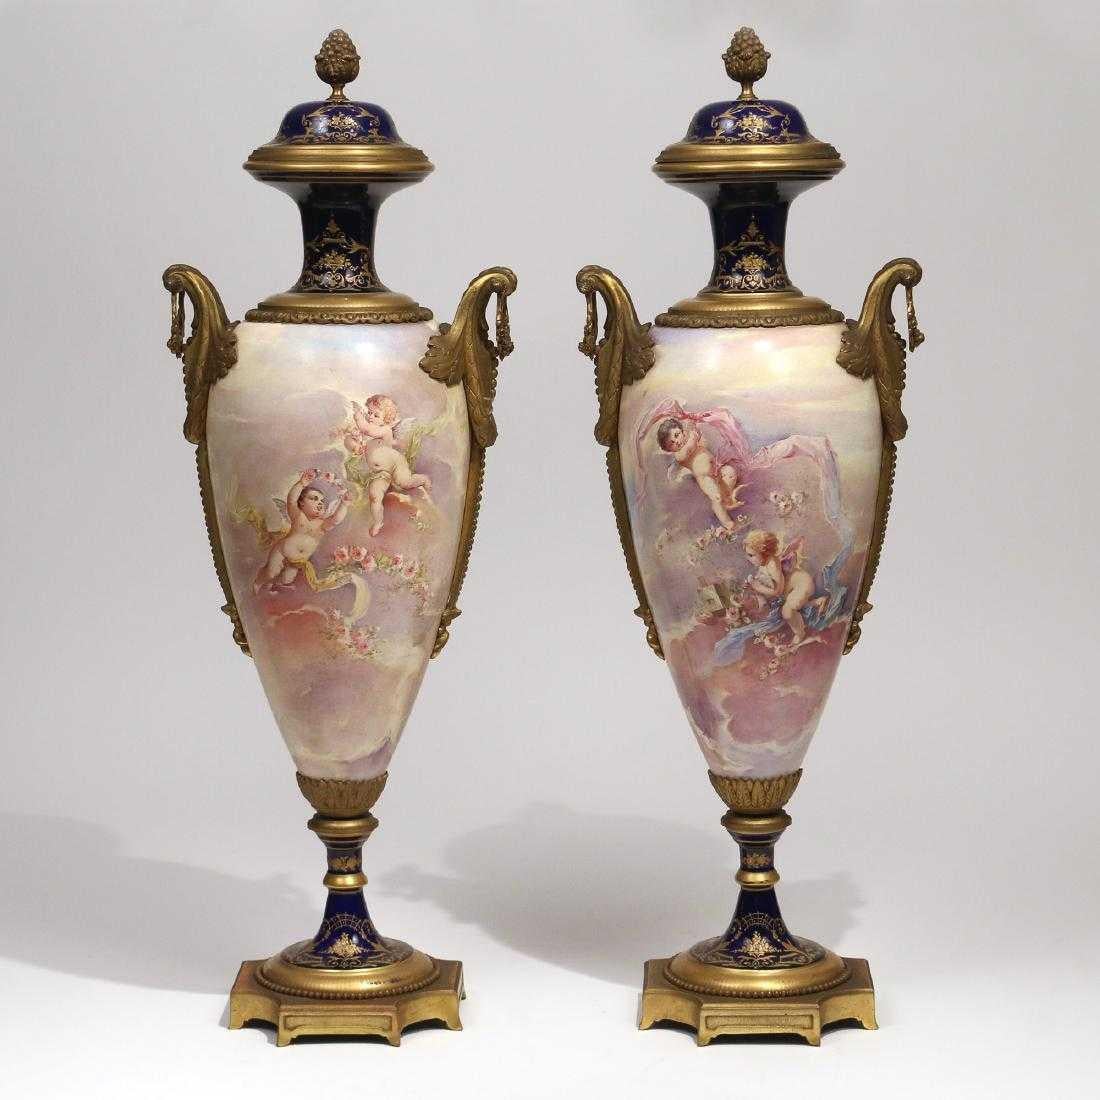 19th Century Beautiful Pair of French Bronze-Mounted Sèvres Porcelain Vases and Covers